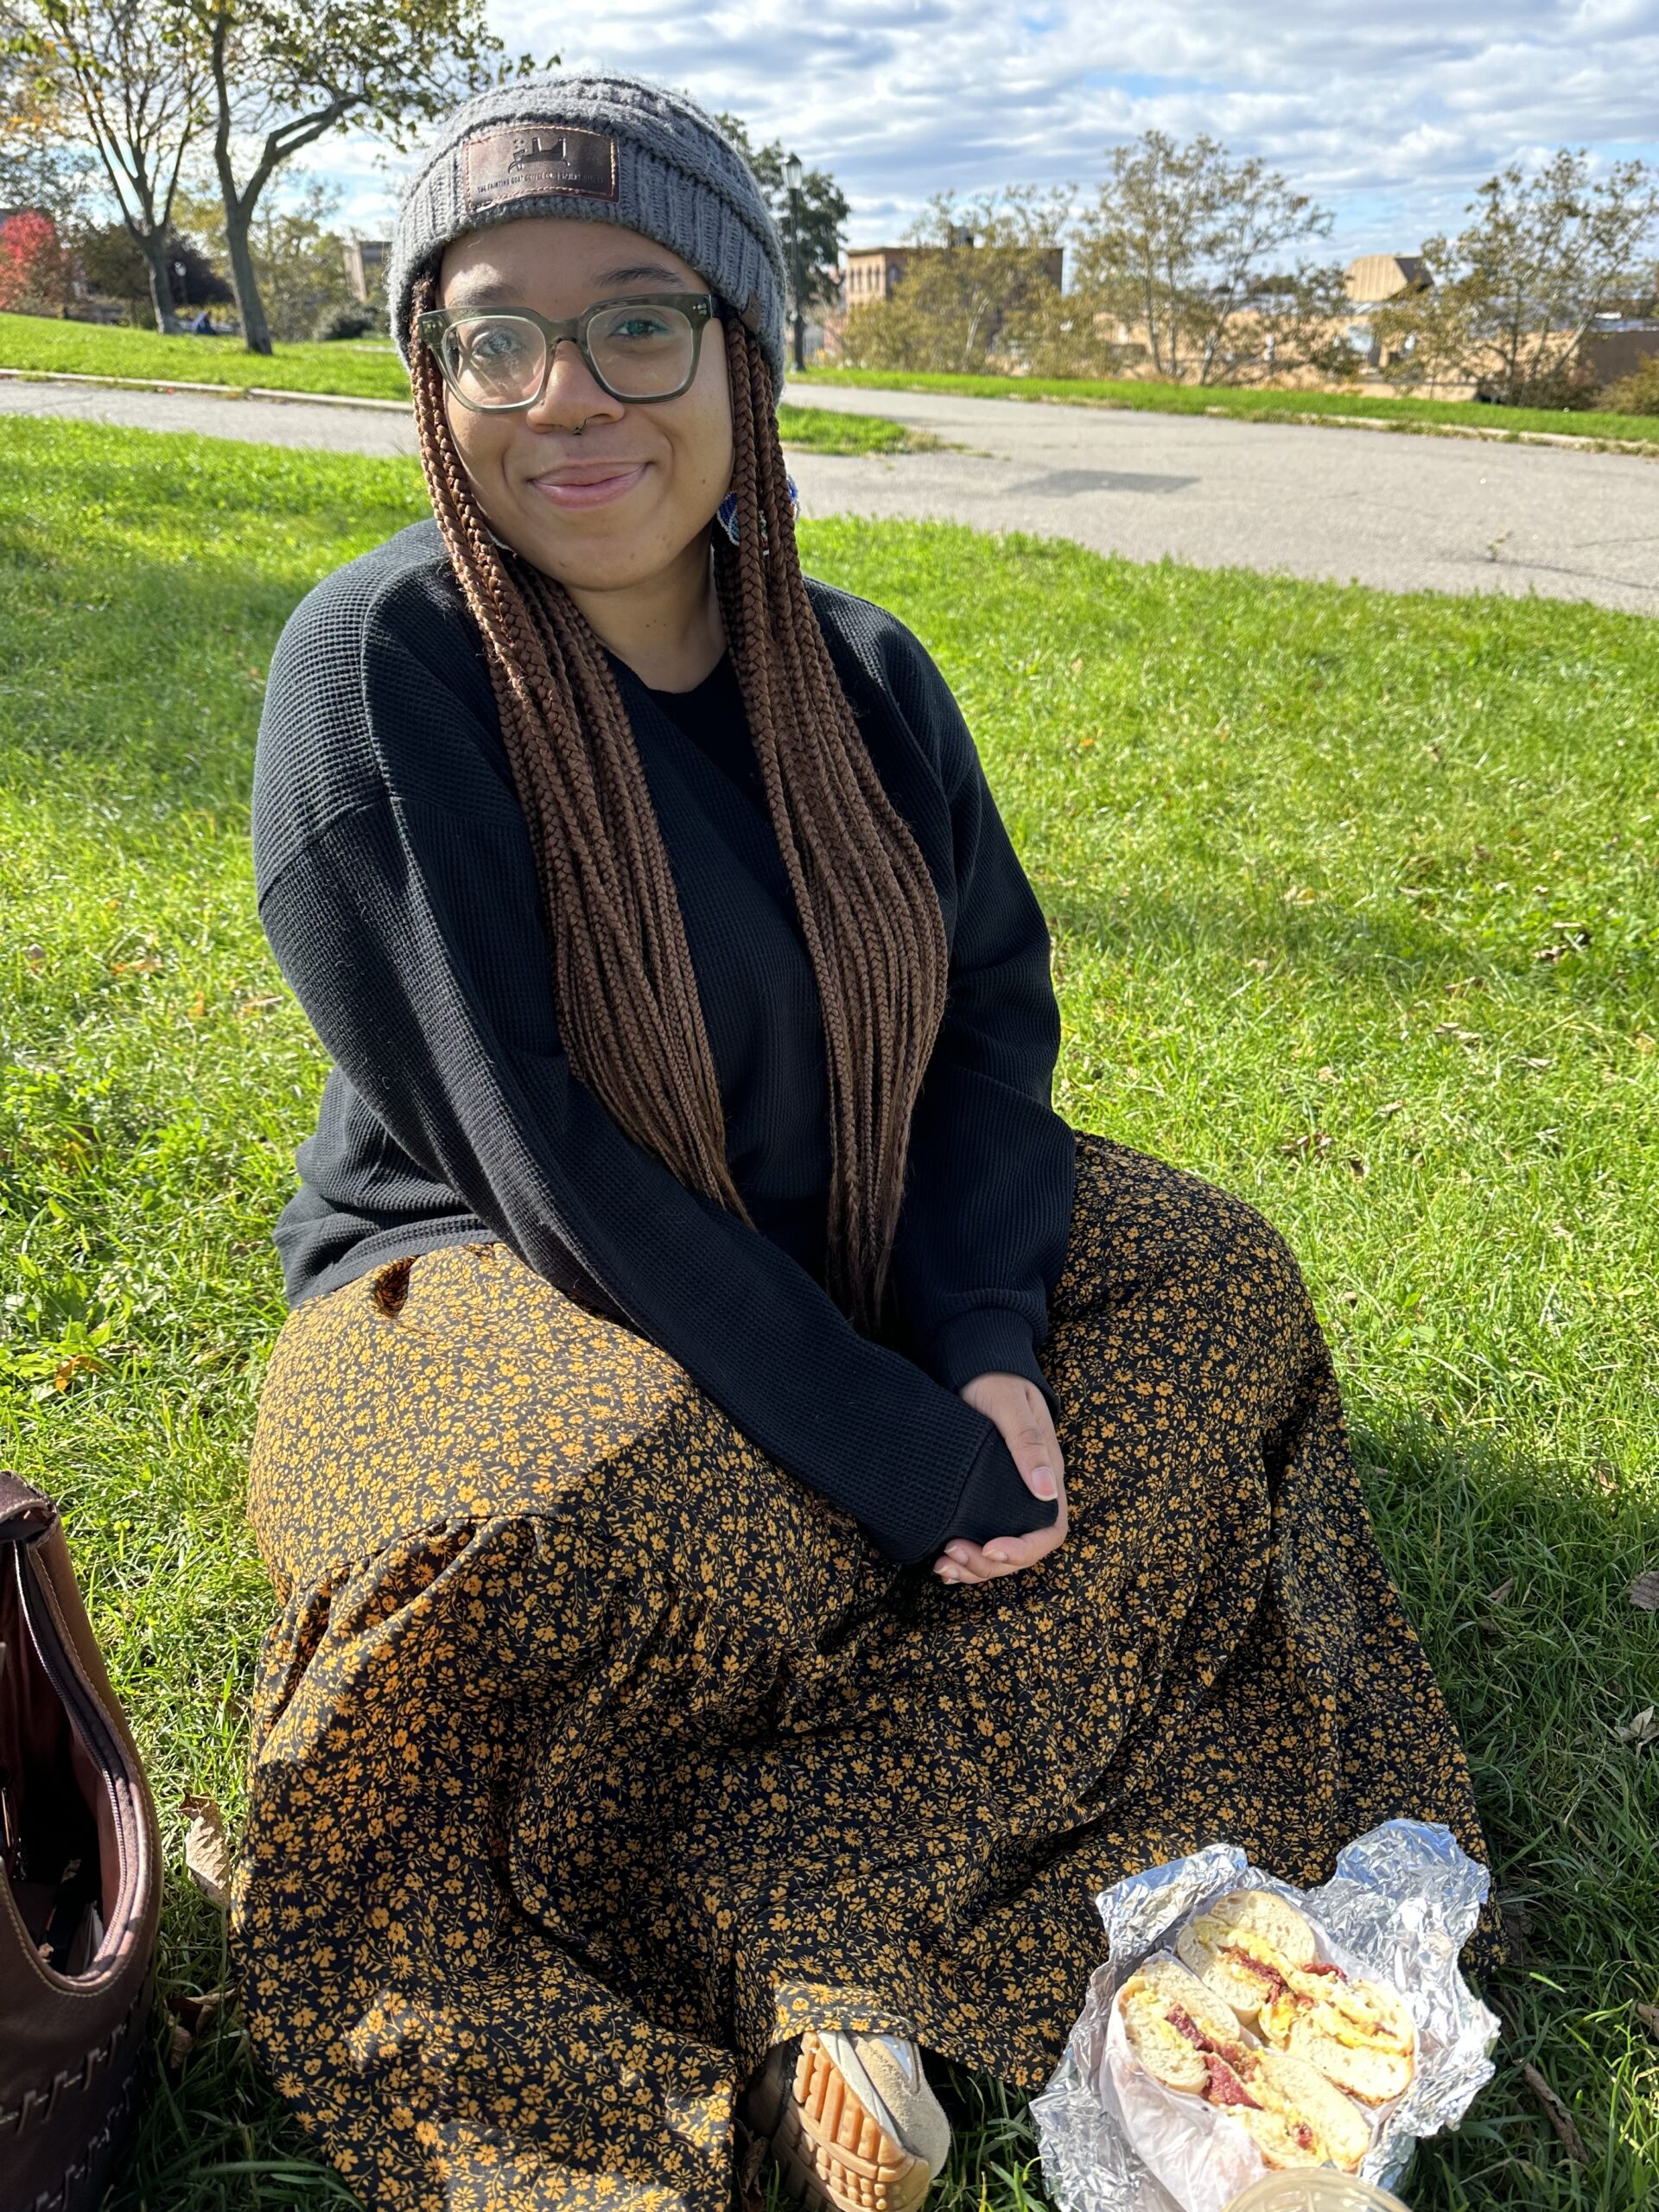 A Black person in a gray beanie, black long sleeve, and orange and black dress sits cross-legged in a park.